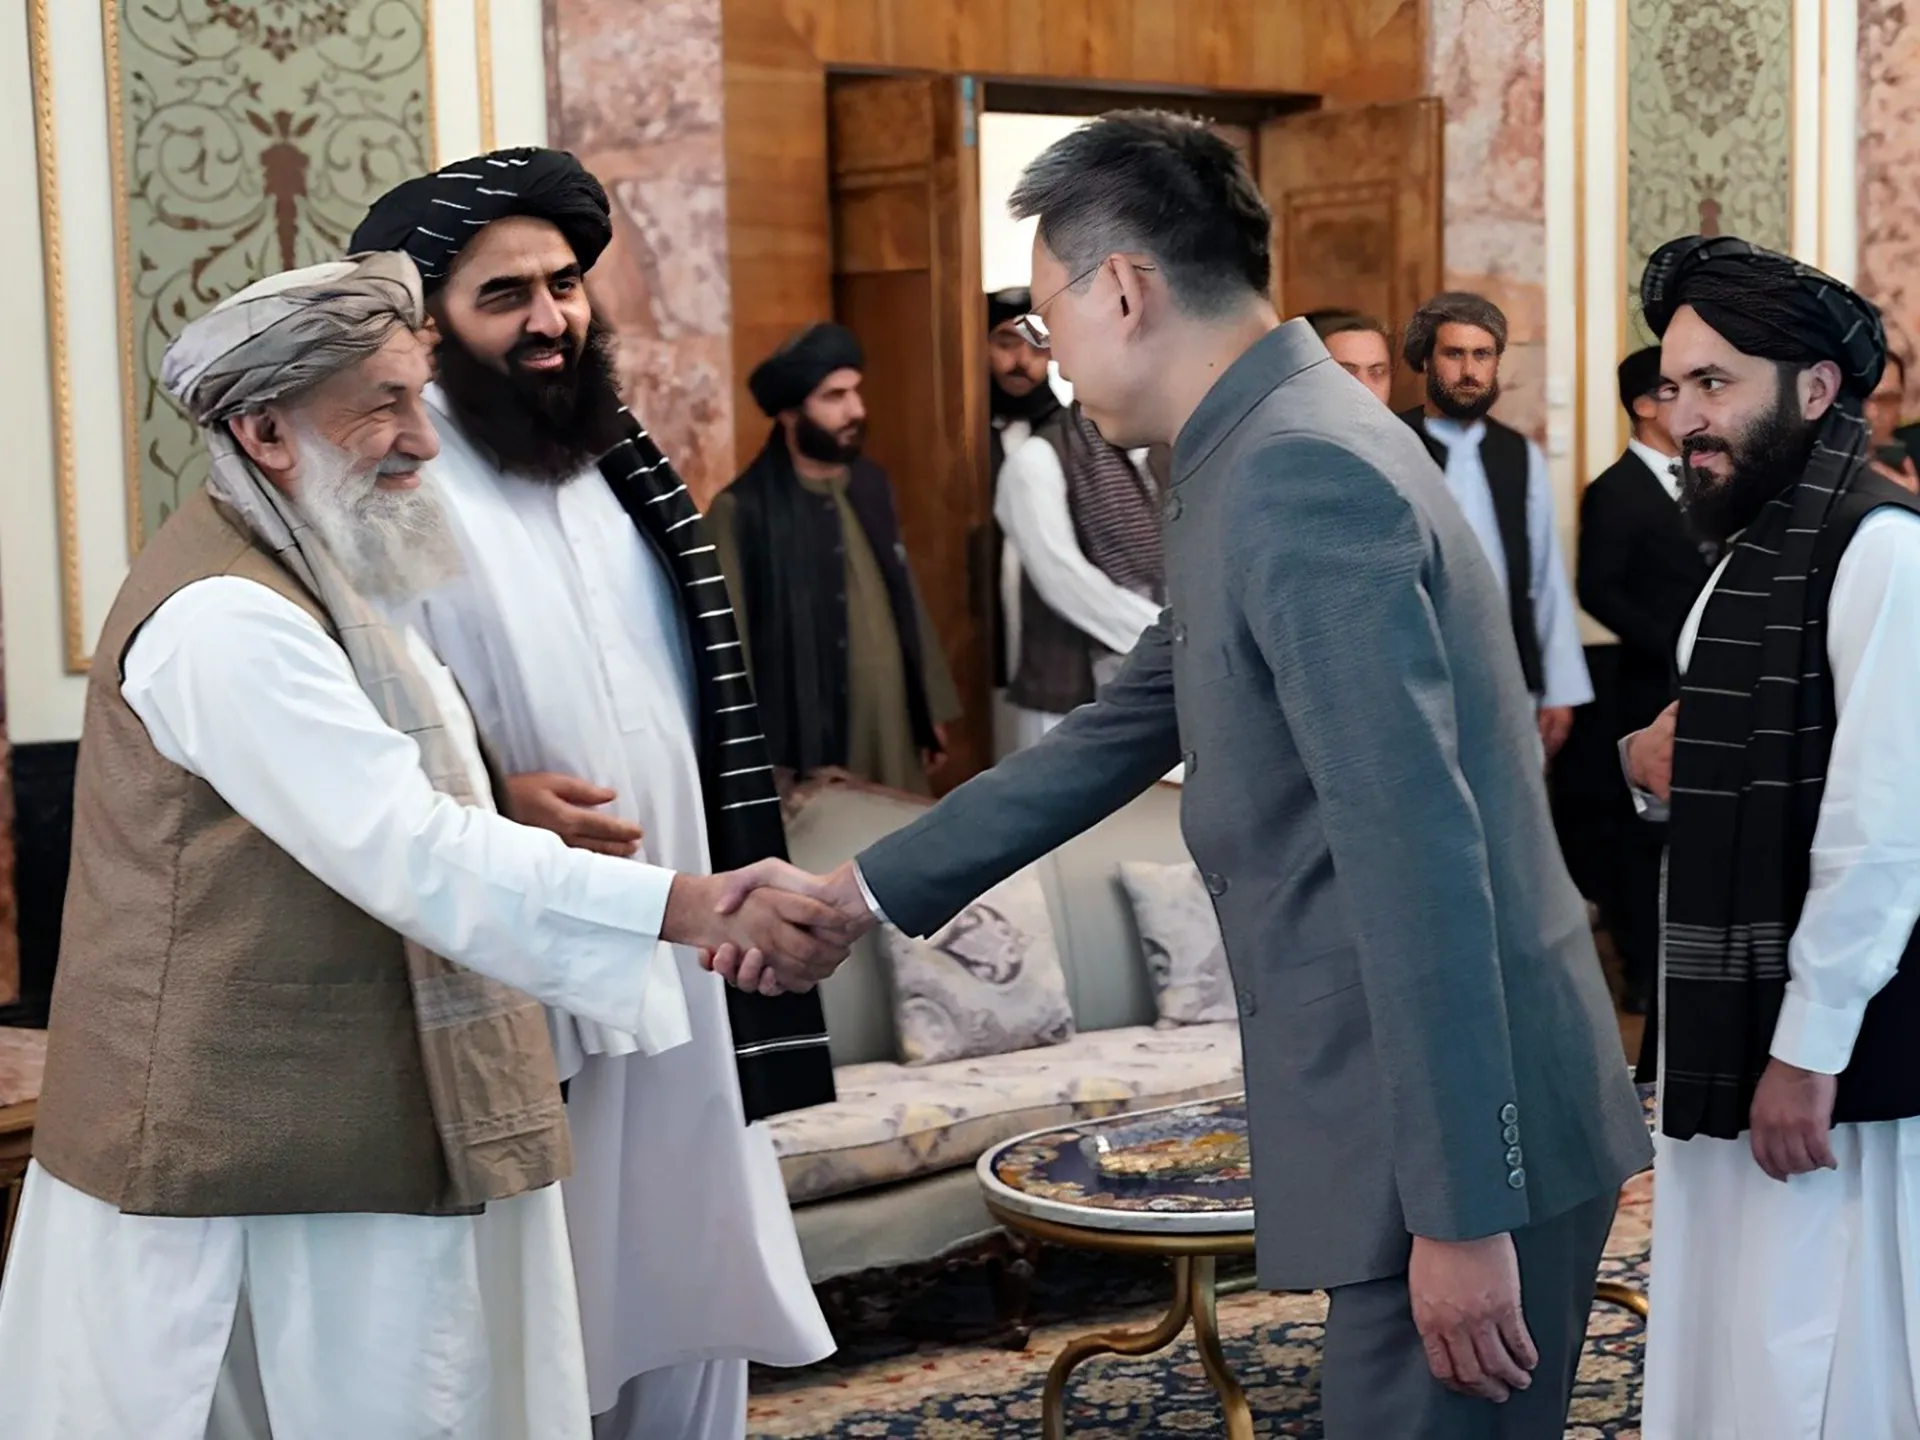 Ambassador Zhao Sheng of China shakes hands with Taliban Prime Minister Mohammad Hasan Akhund during a recognition ceremony in Kabul, Afghanistan. Date: September 13, 2023. Image courtesy: Taliban Prime Minister Media Office via AP.